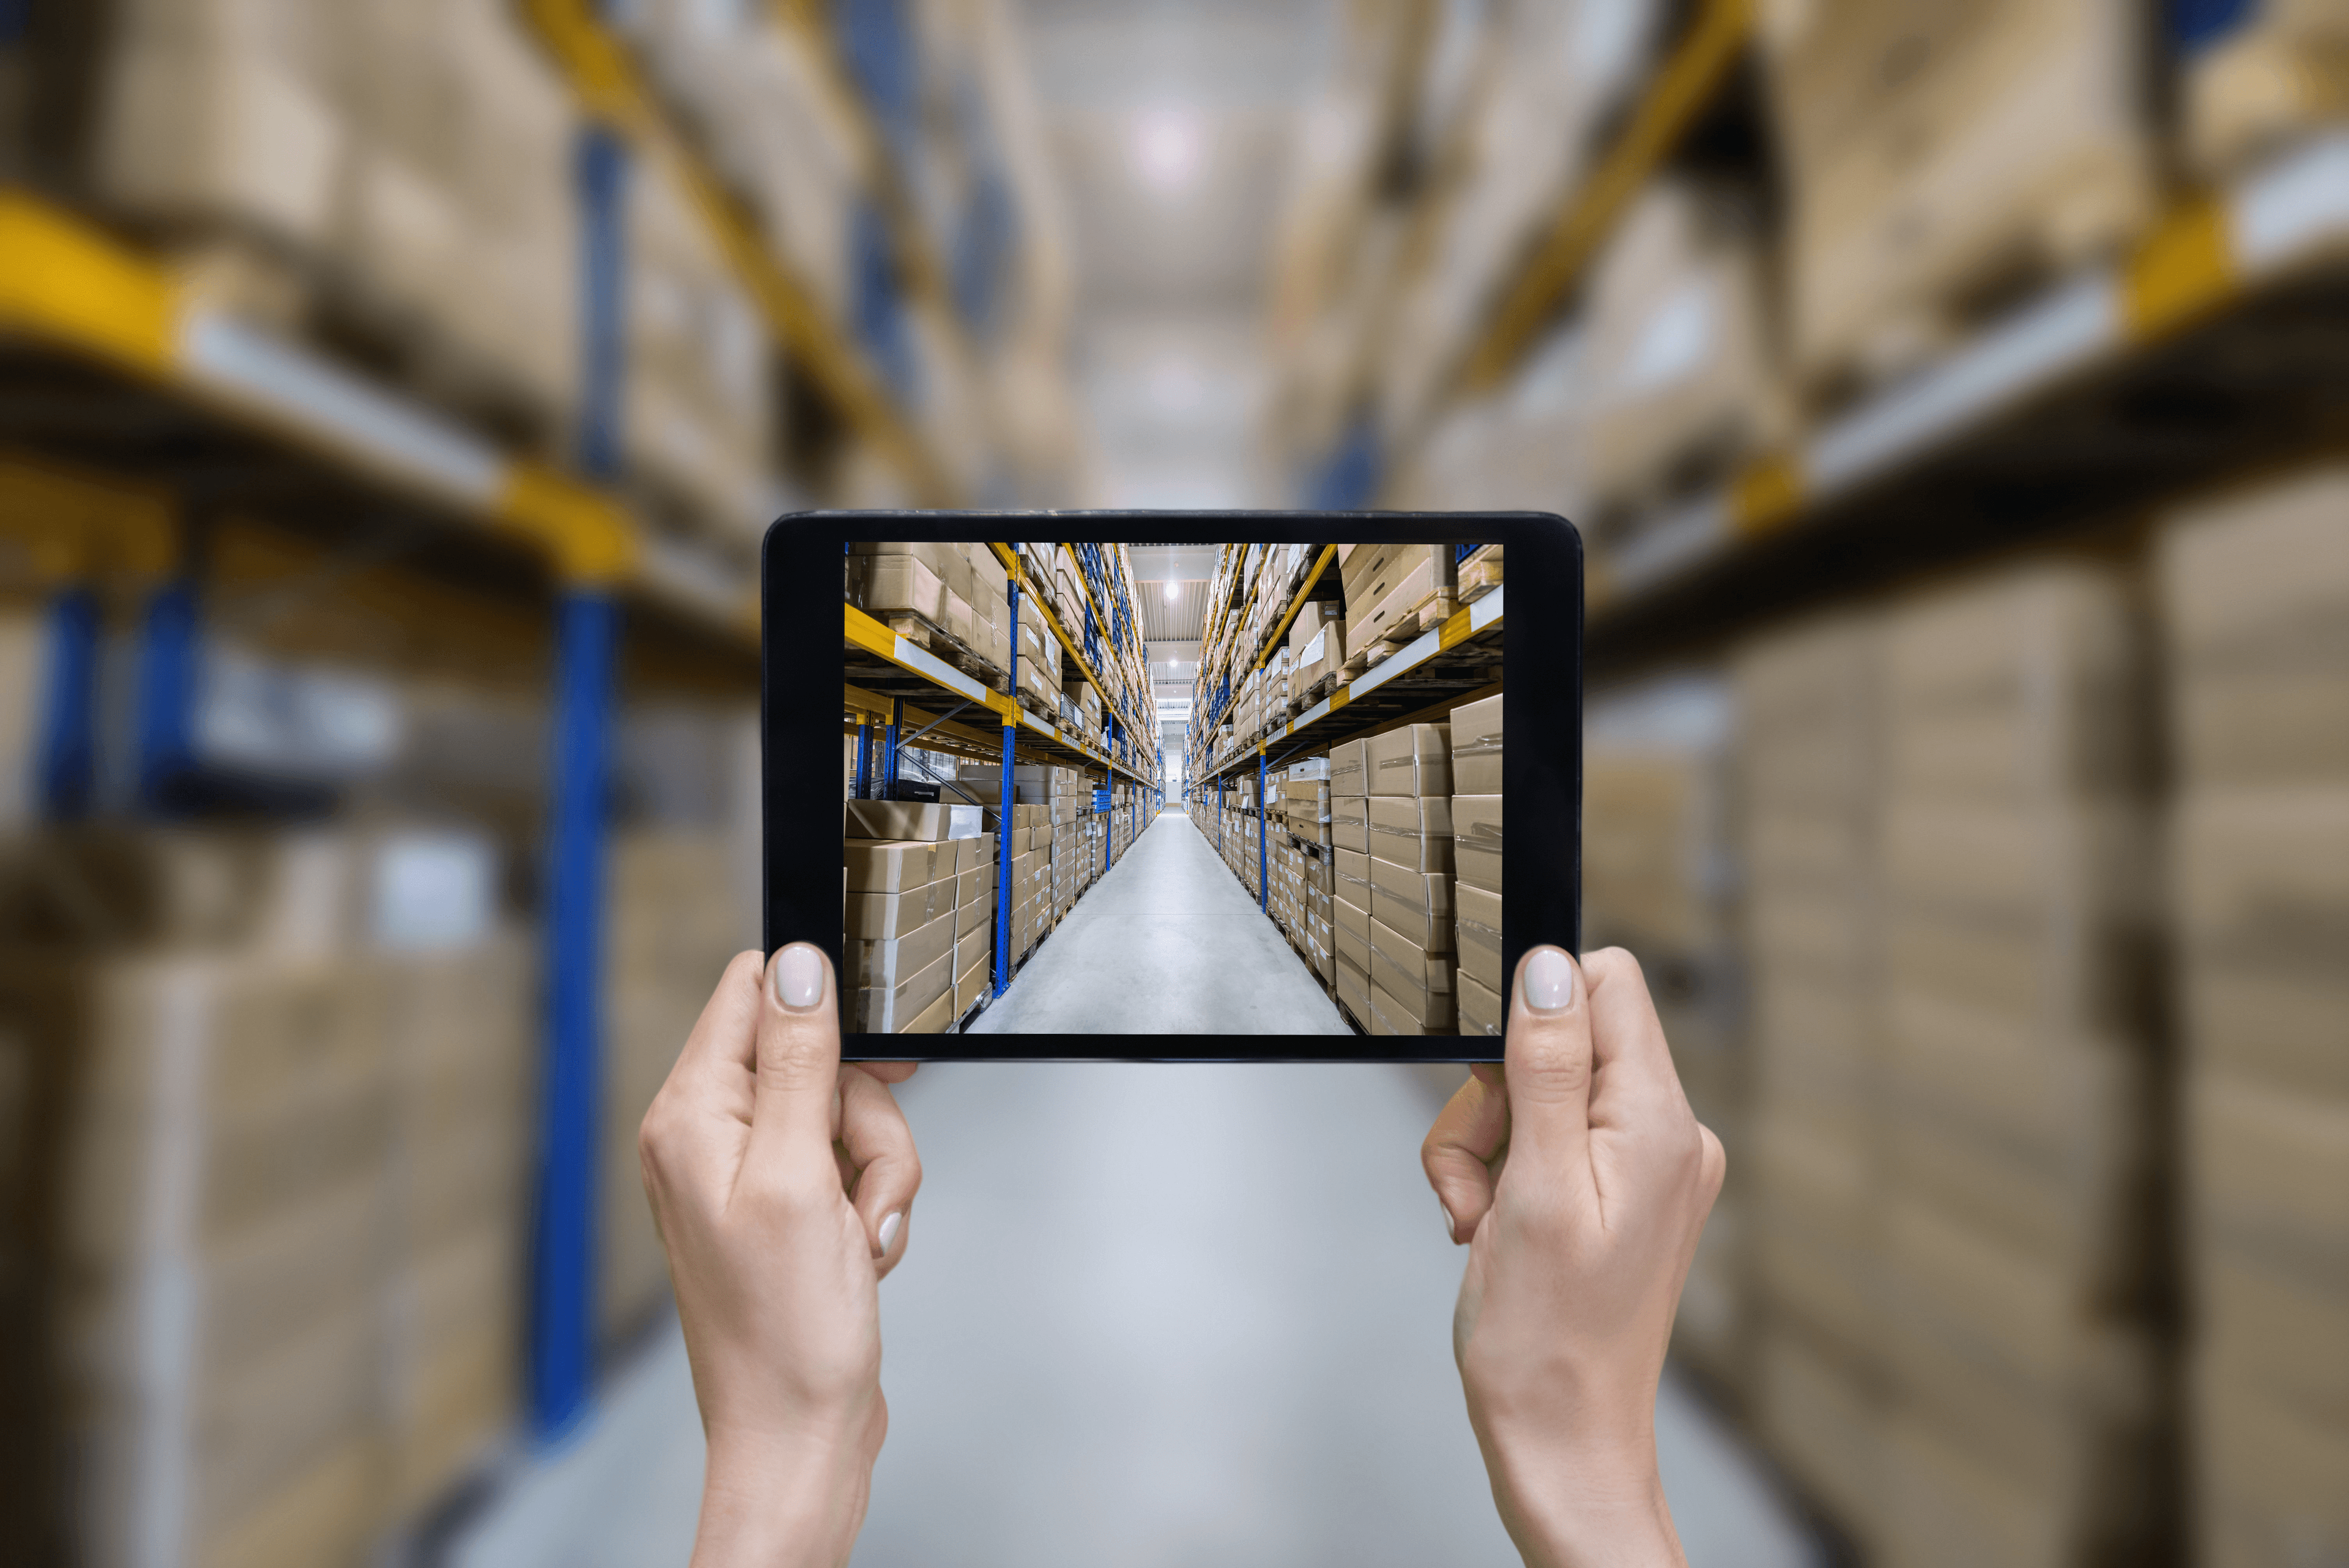 Hands hold up a tablet looking down the alley of a warehouse